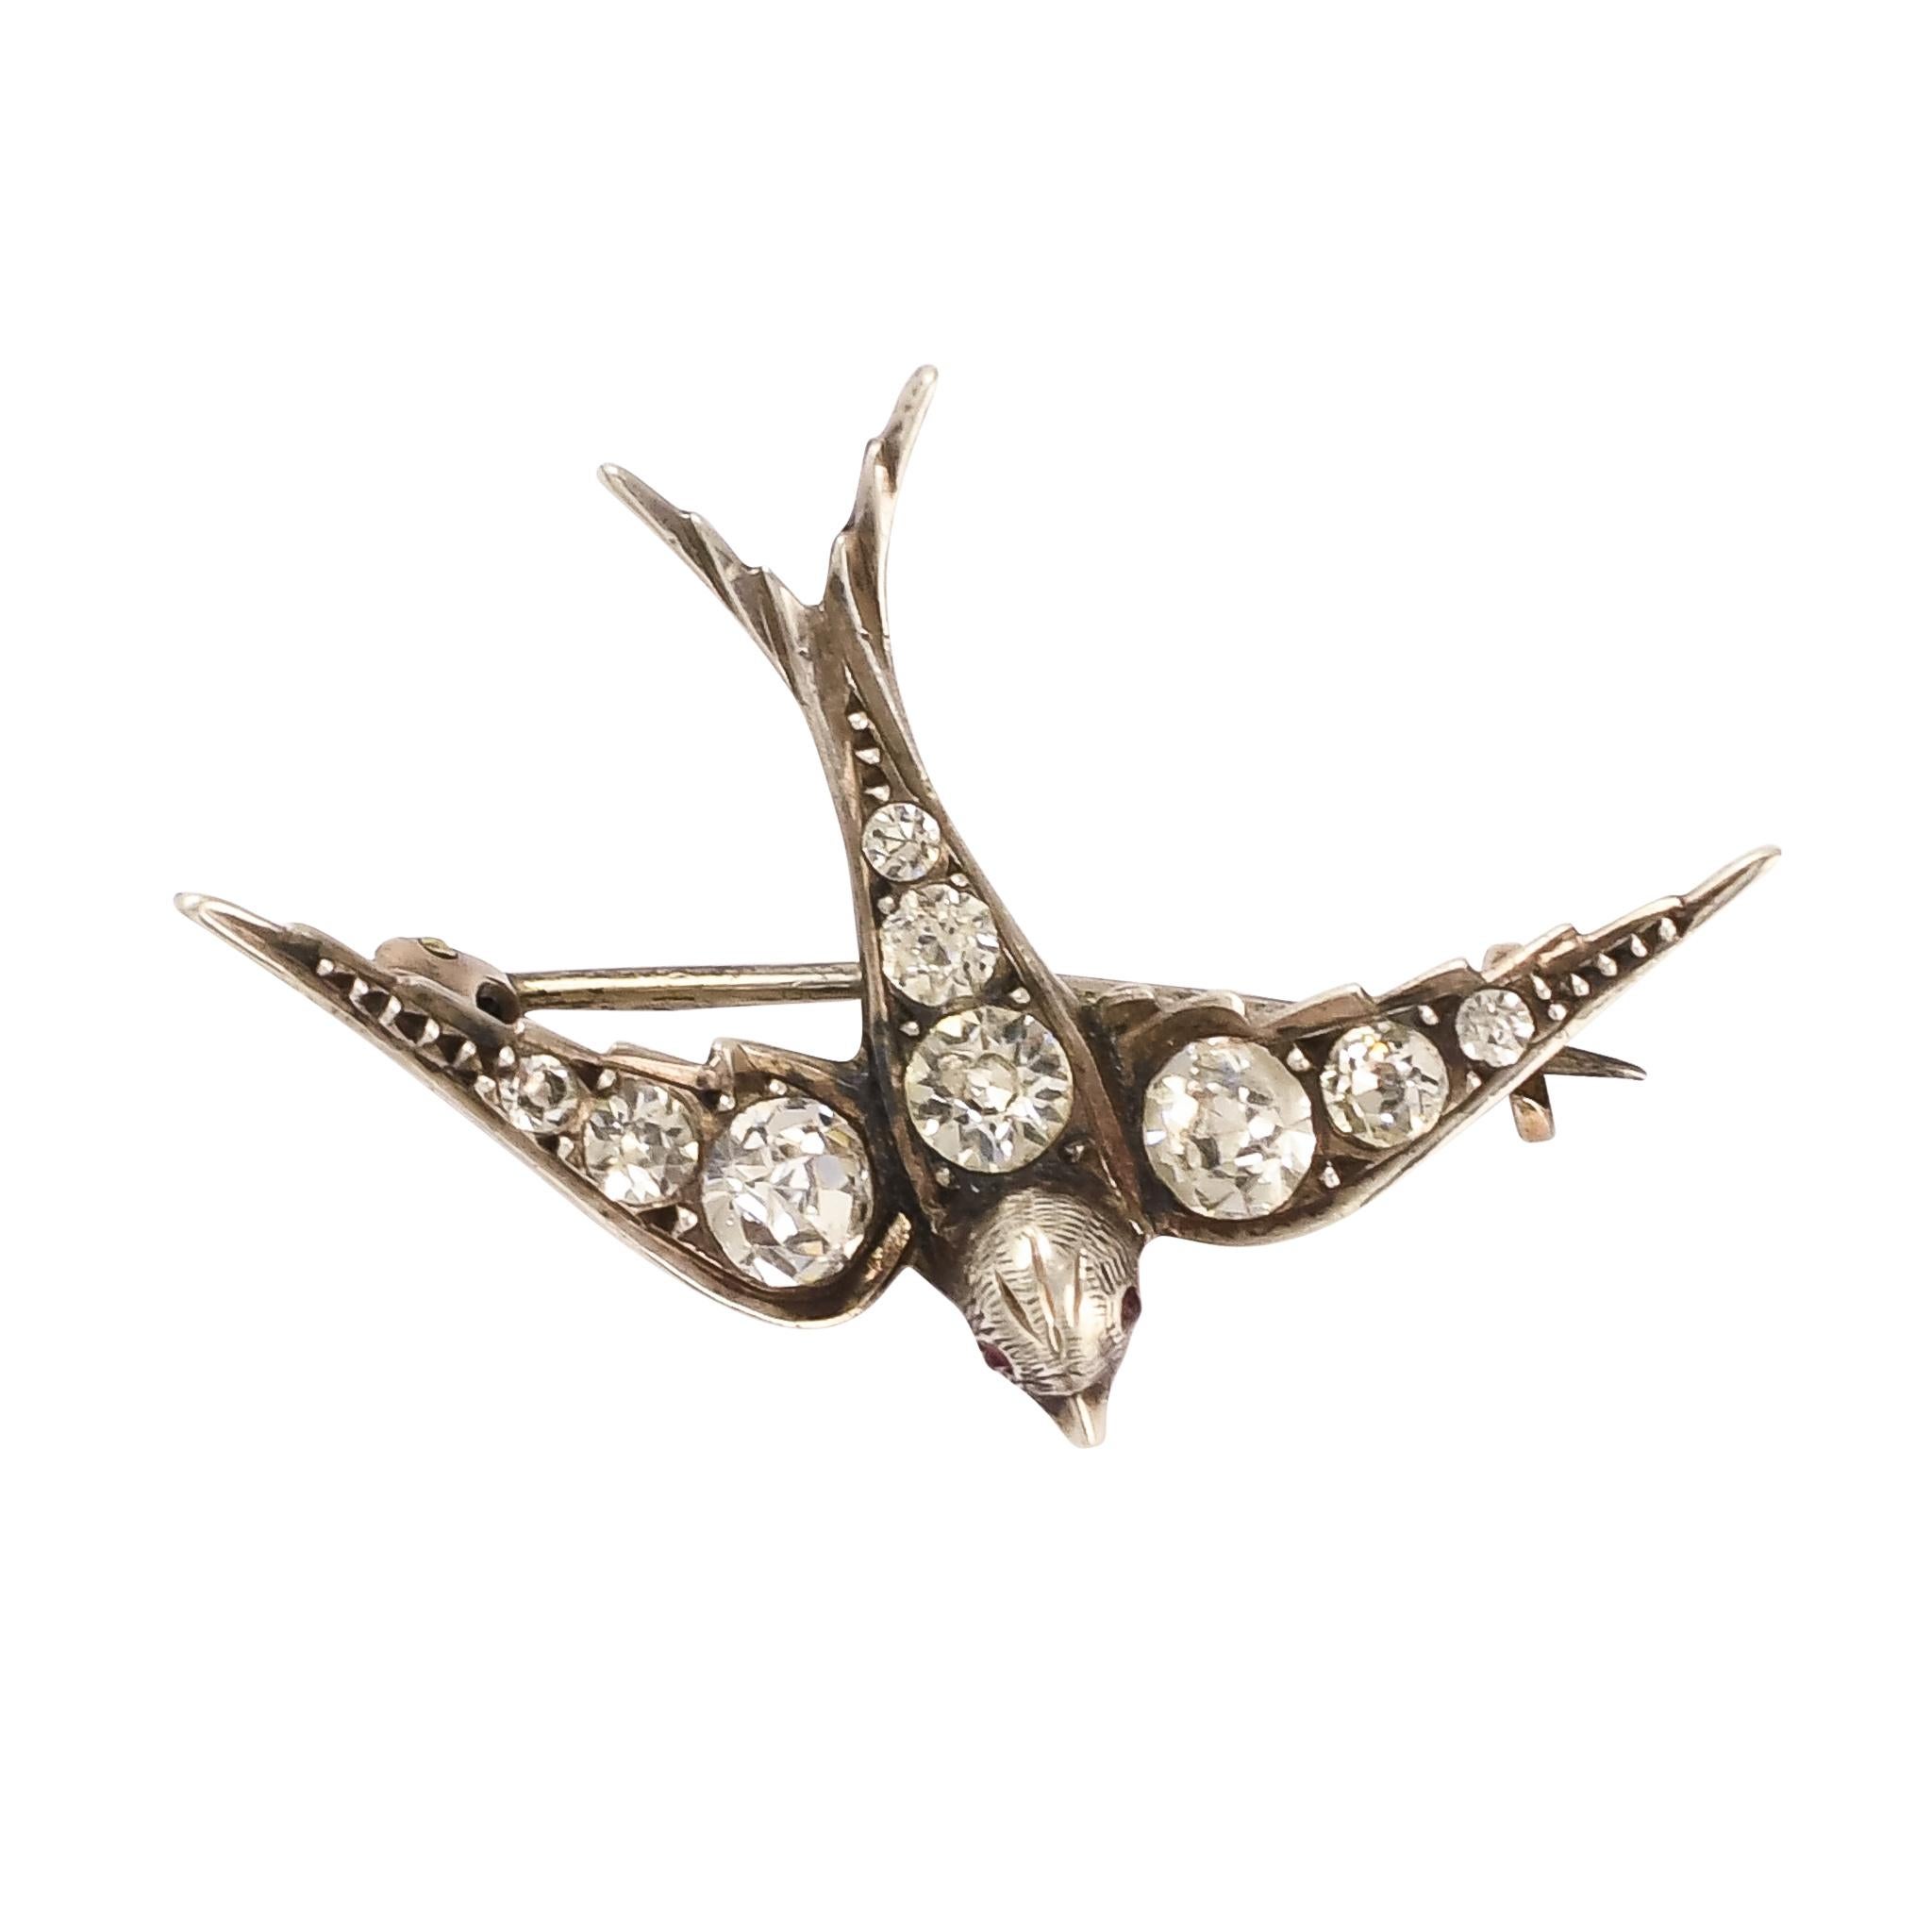 A beautiful early Victorian diving swallow brooch set with bright white paste gemstones. The sterling silver has oxidised around the stones, creating the most gorgeous patina, and also enhancing the appearance of the pastes through increased